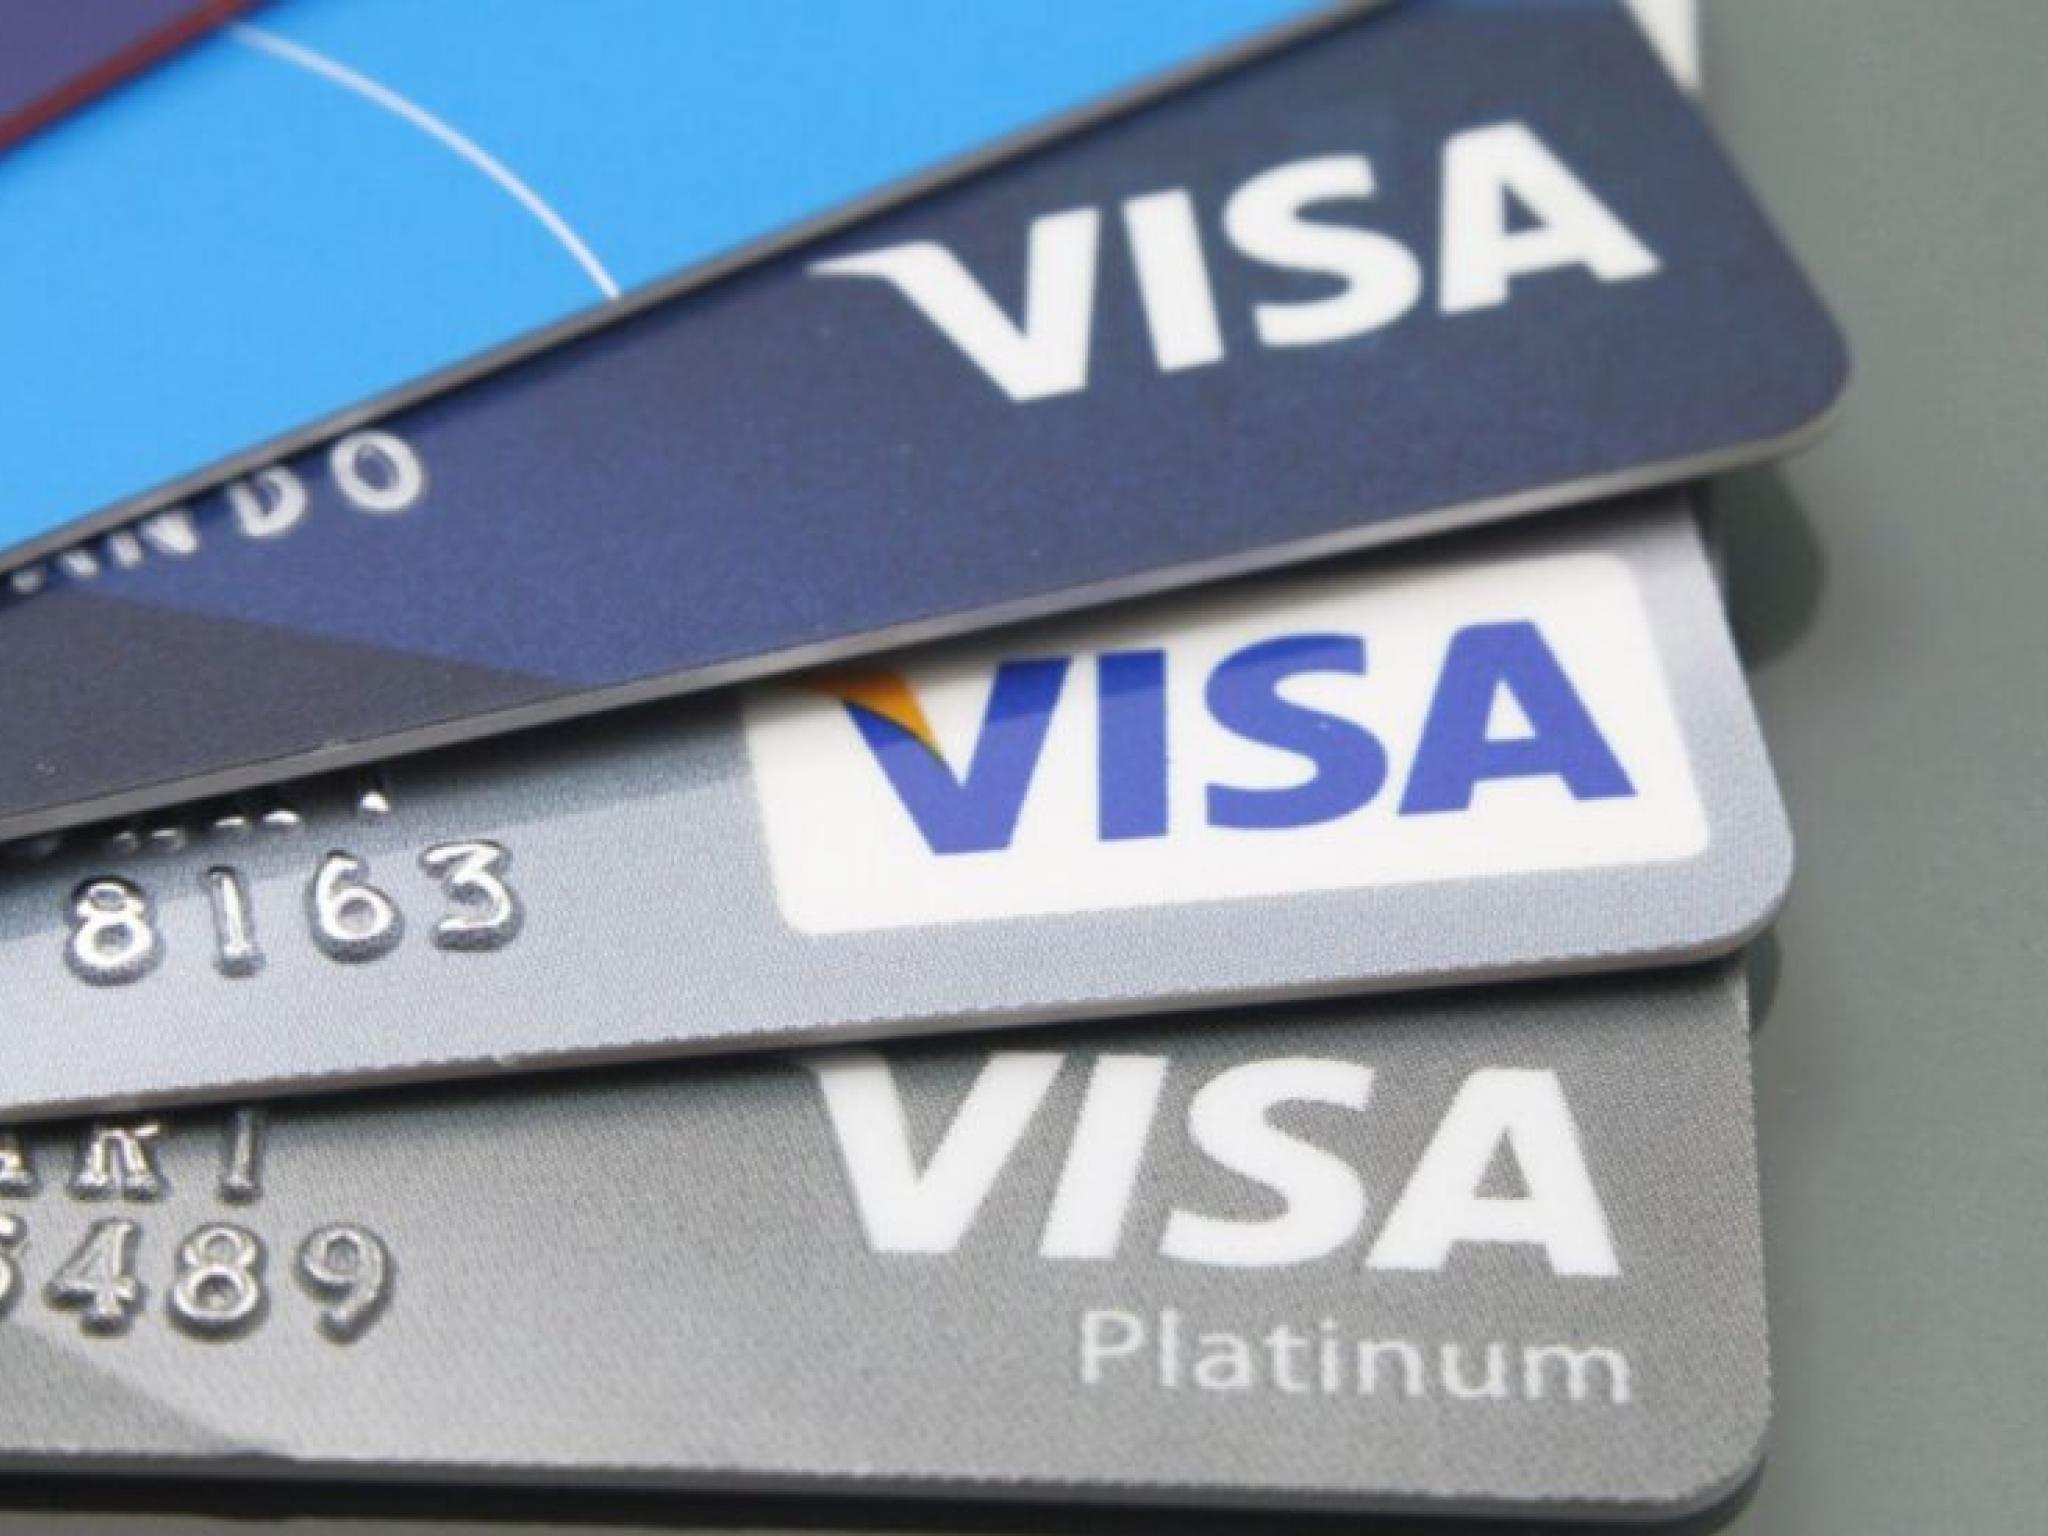  visa-teams-up-with-skipify-to-enrich-consumer-experiences-shares-rise 